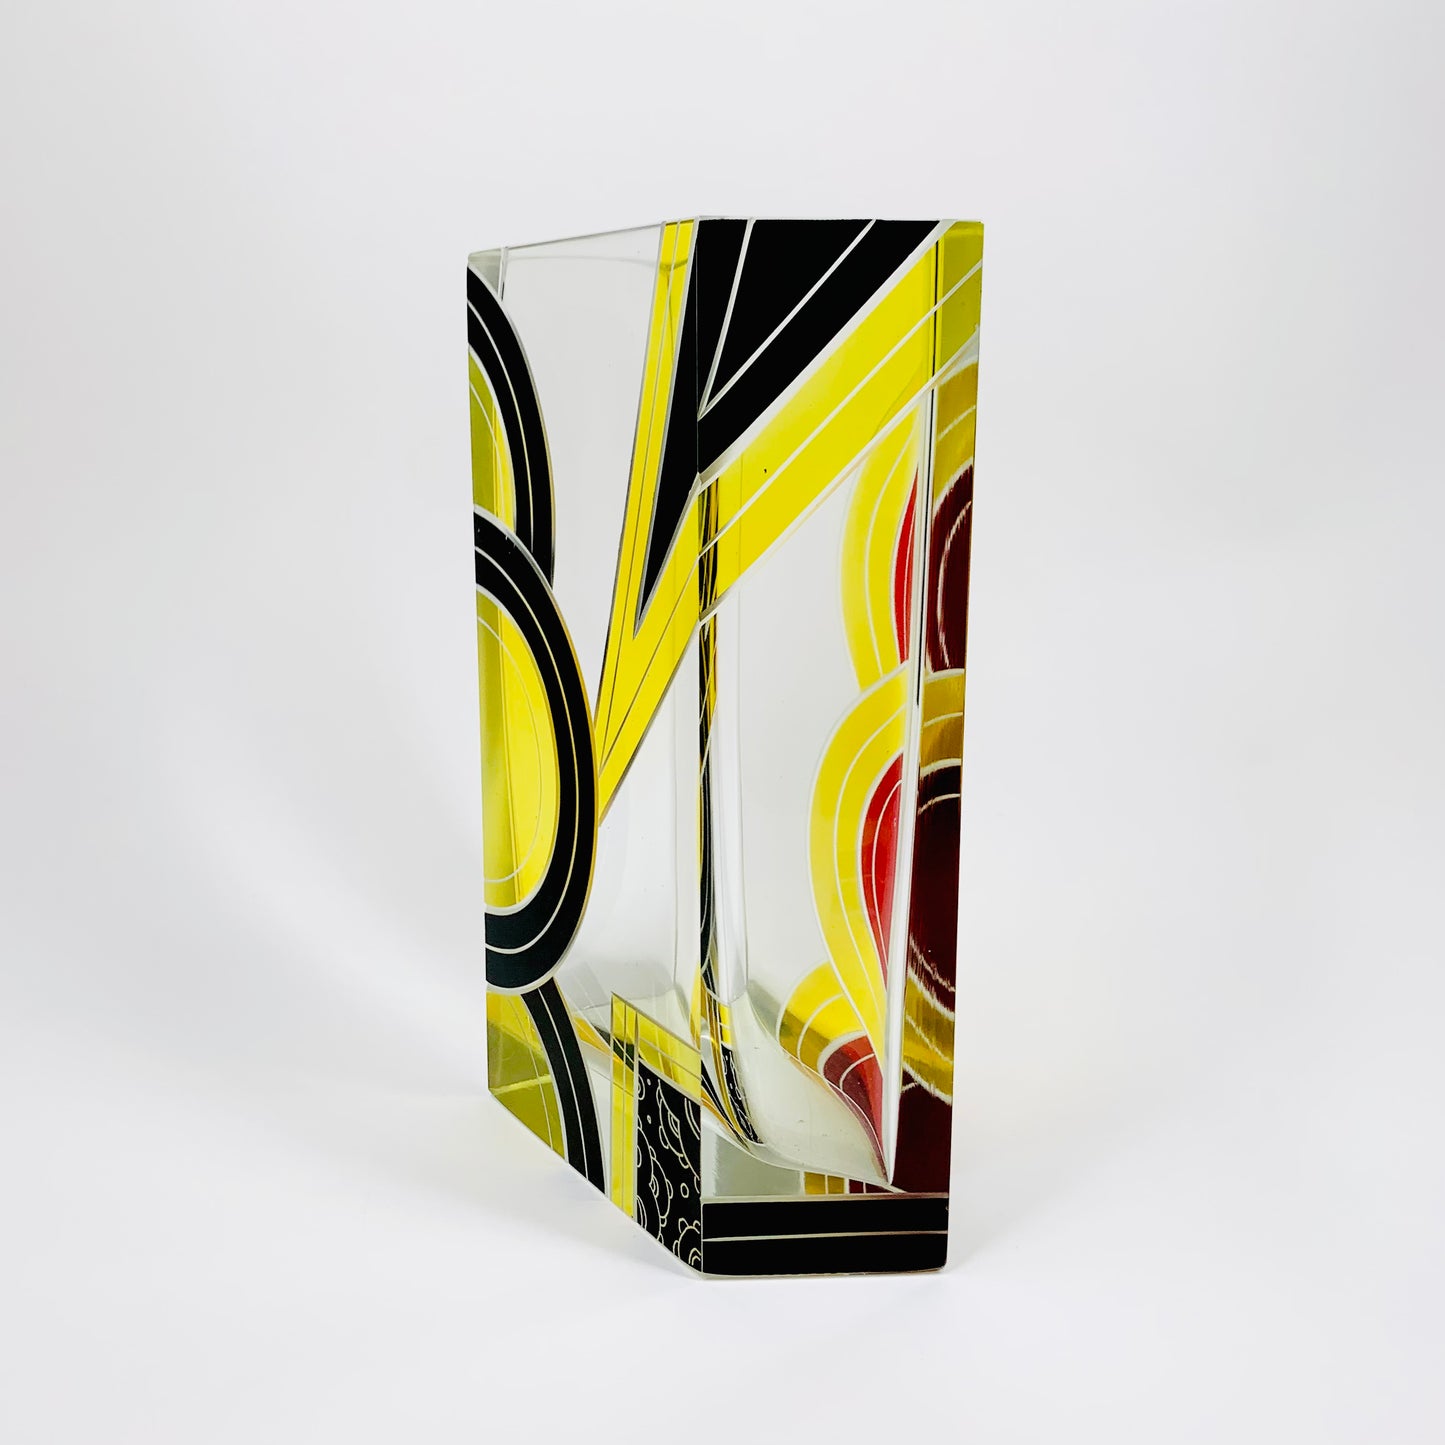 Extremely rare antique Art Deco black, red and yellow enamel glass vase by Karl Palda